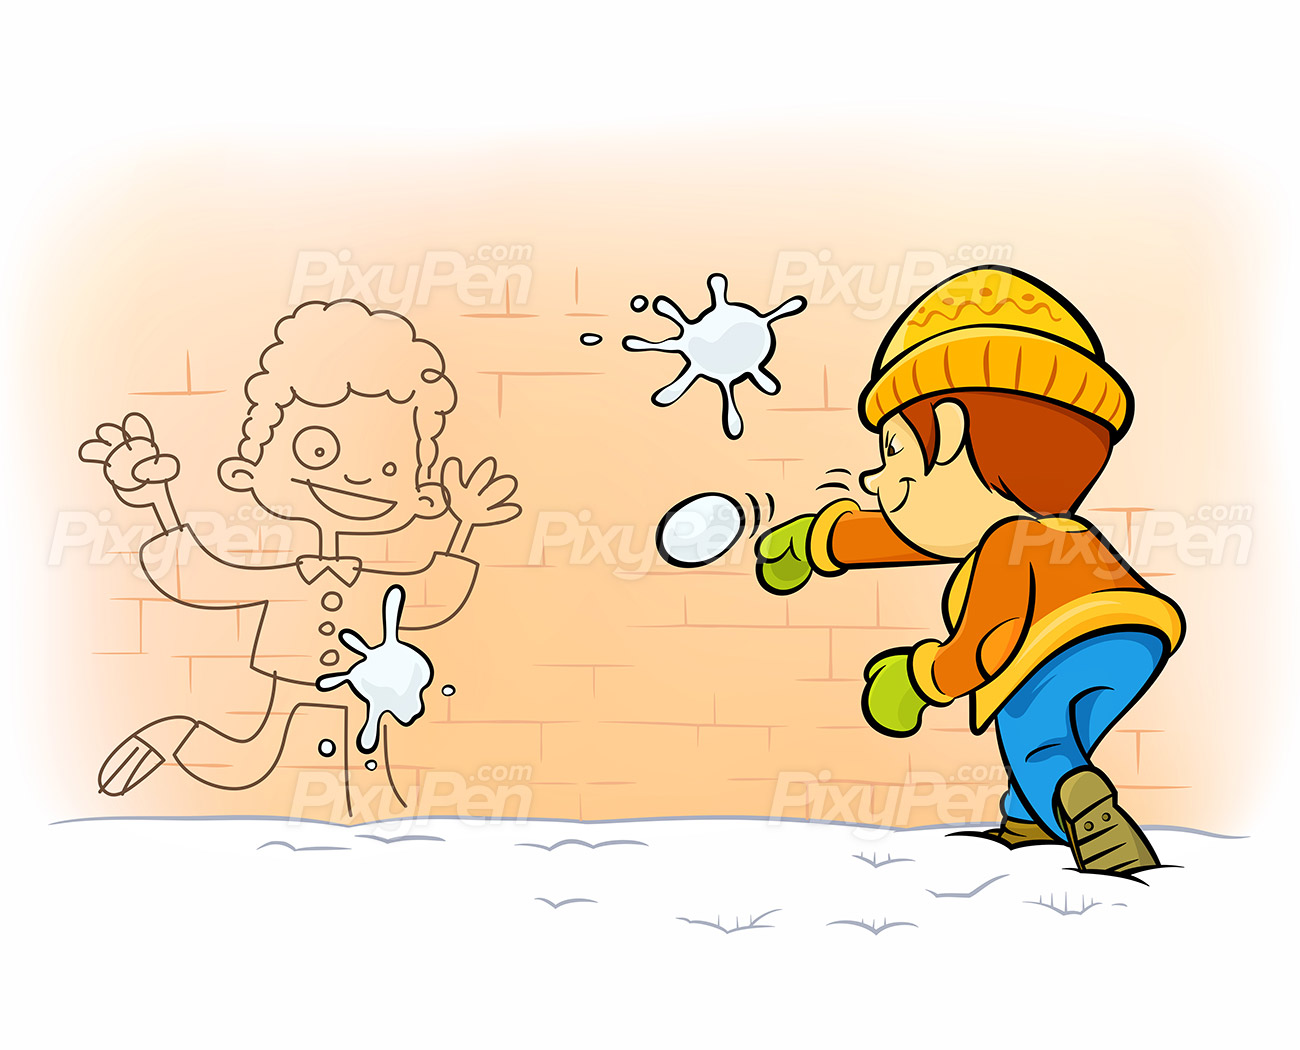 animated snowball fight